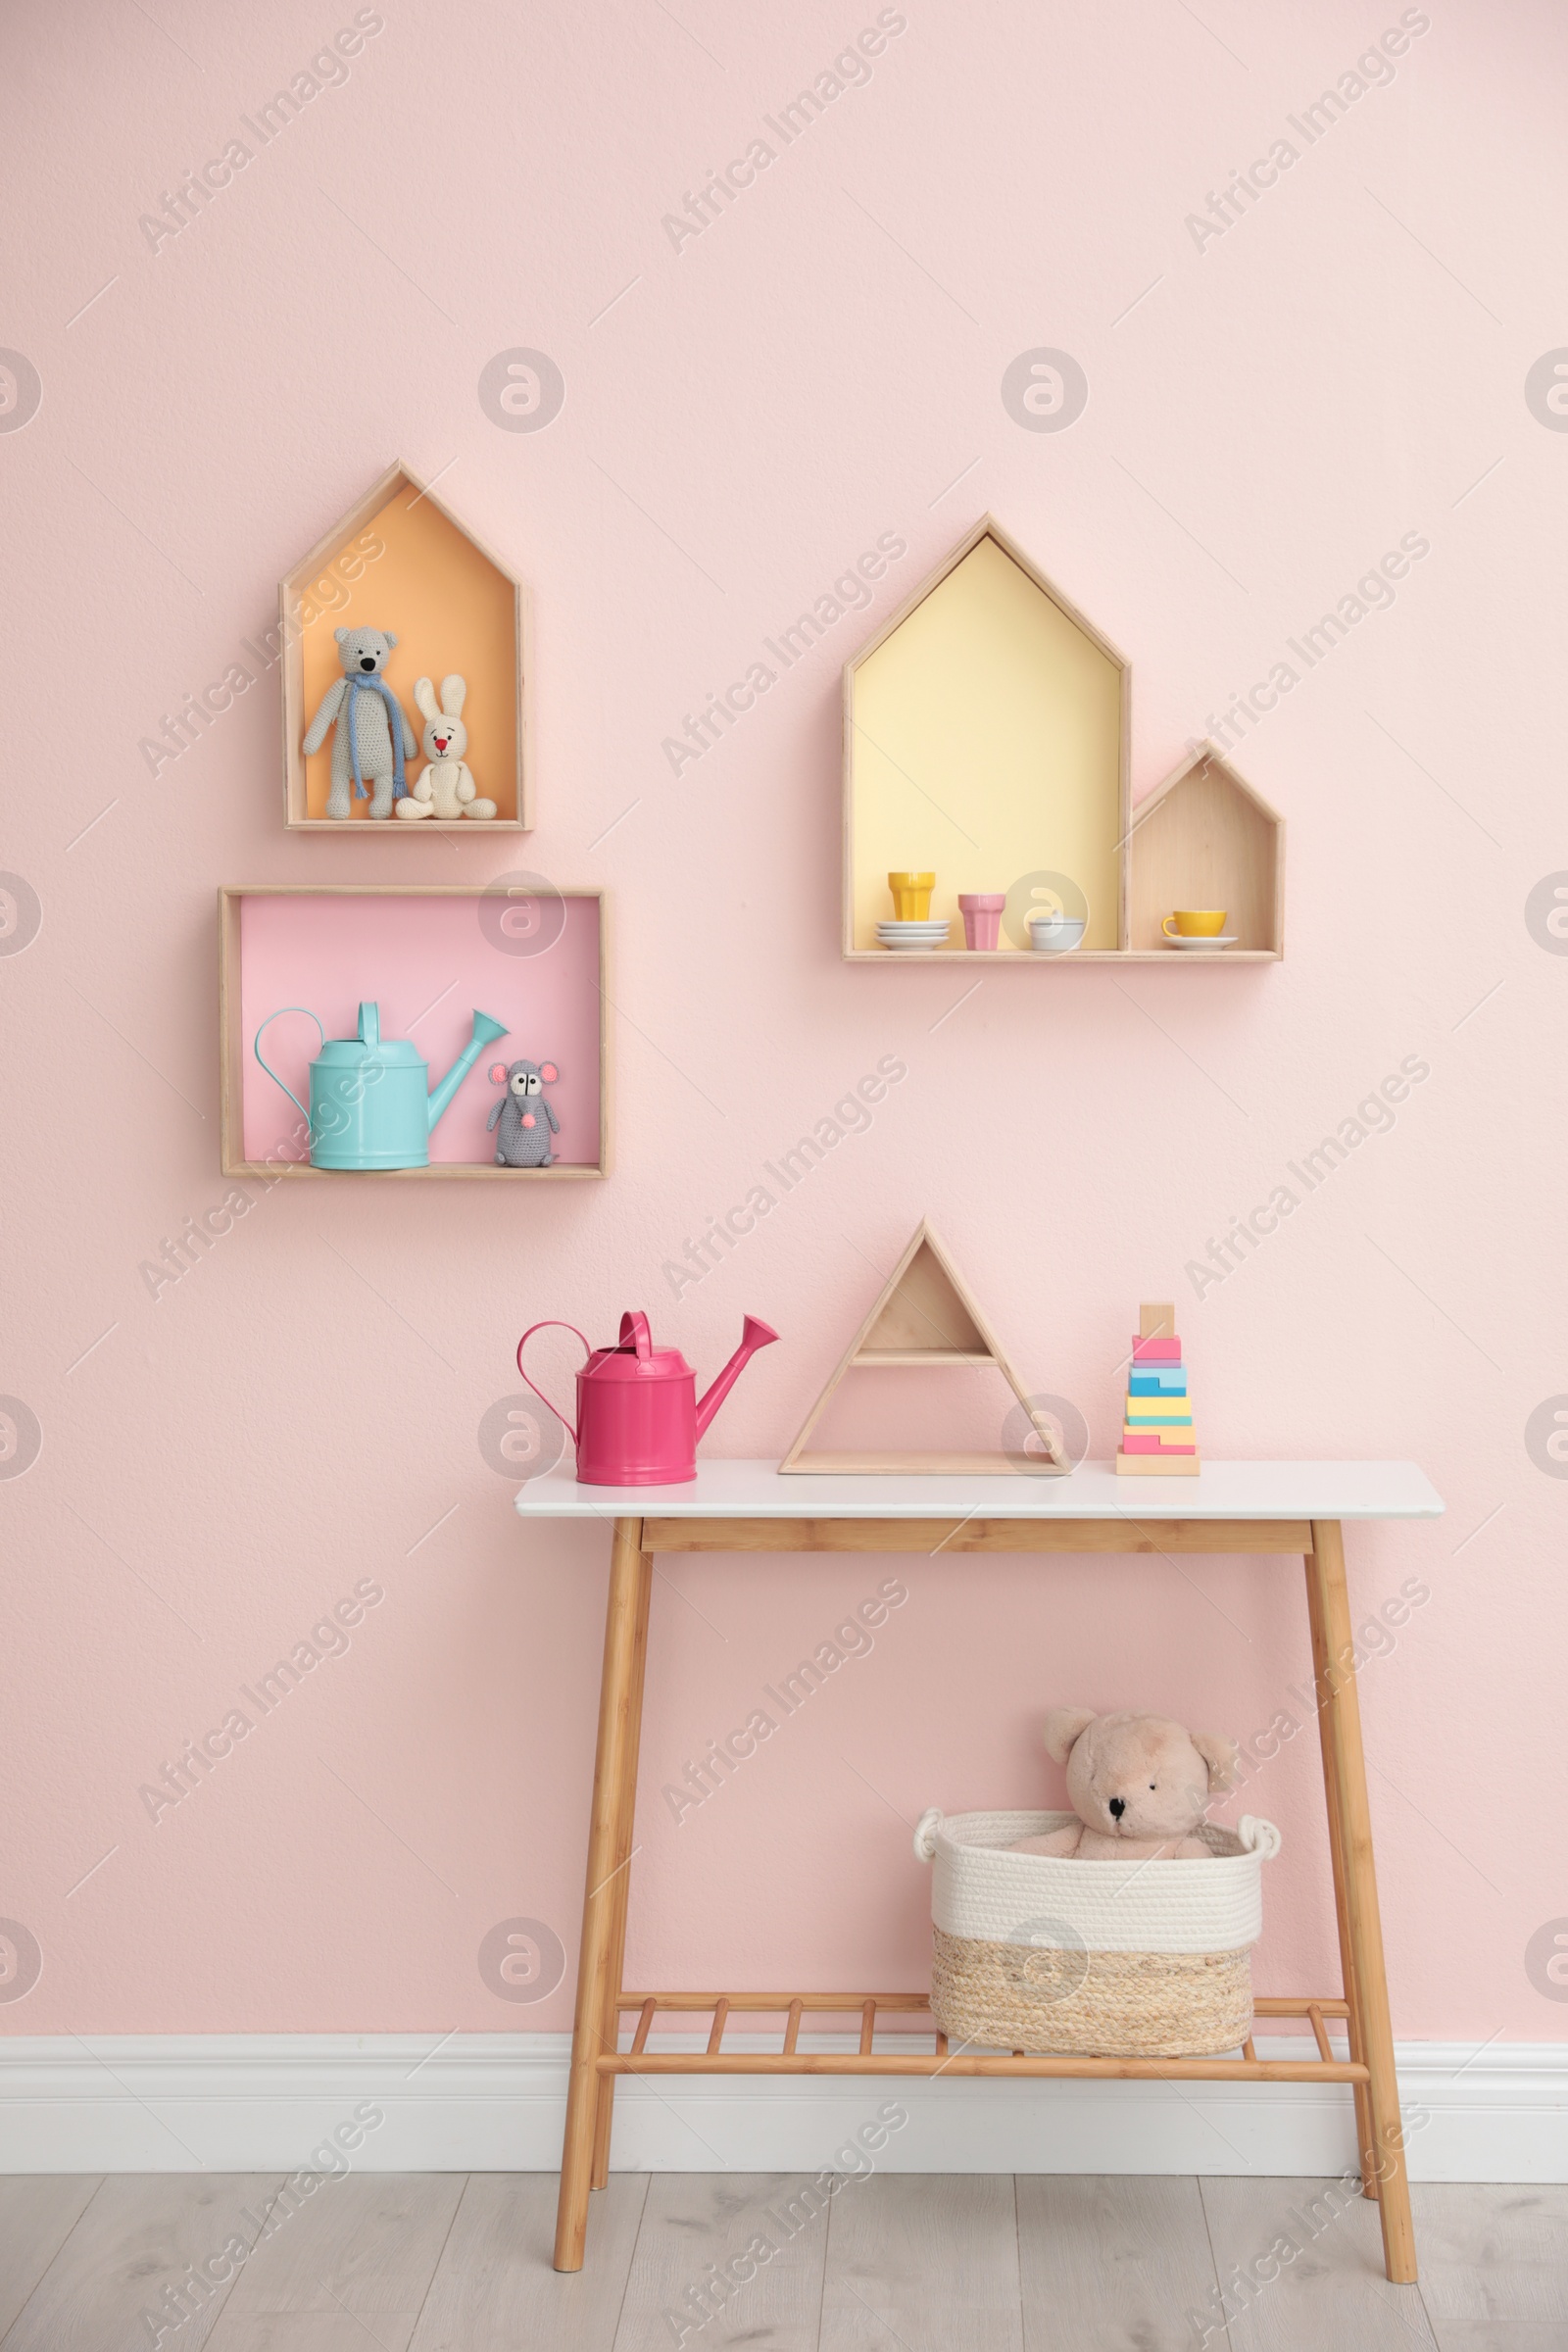 Photo of Stylish baby room interior design with house shaped shelves and wooden table